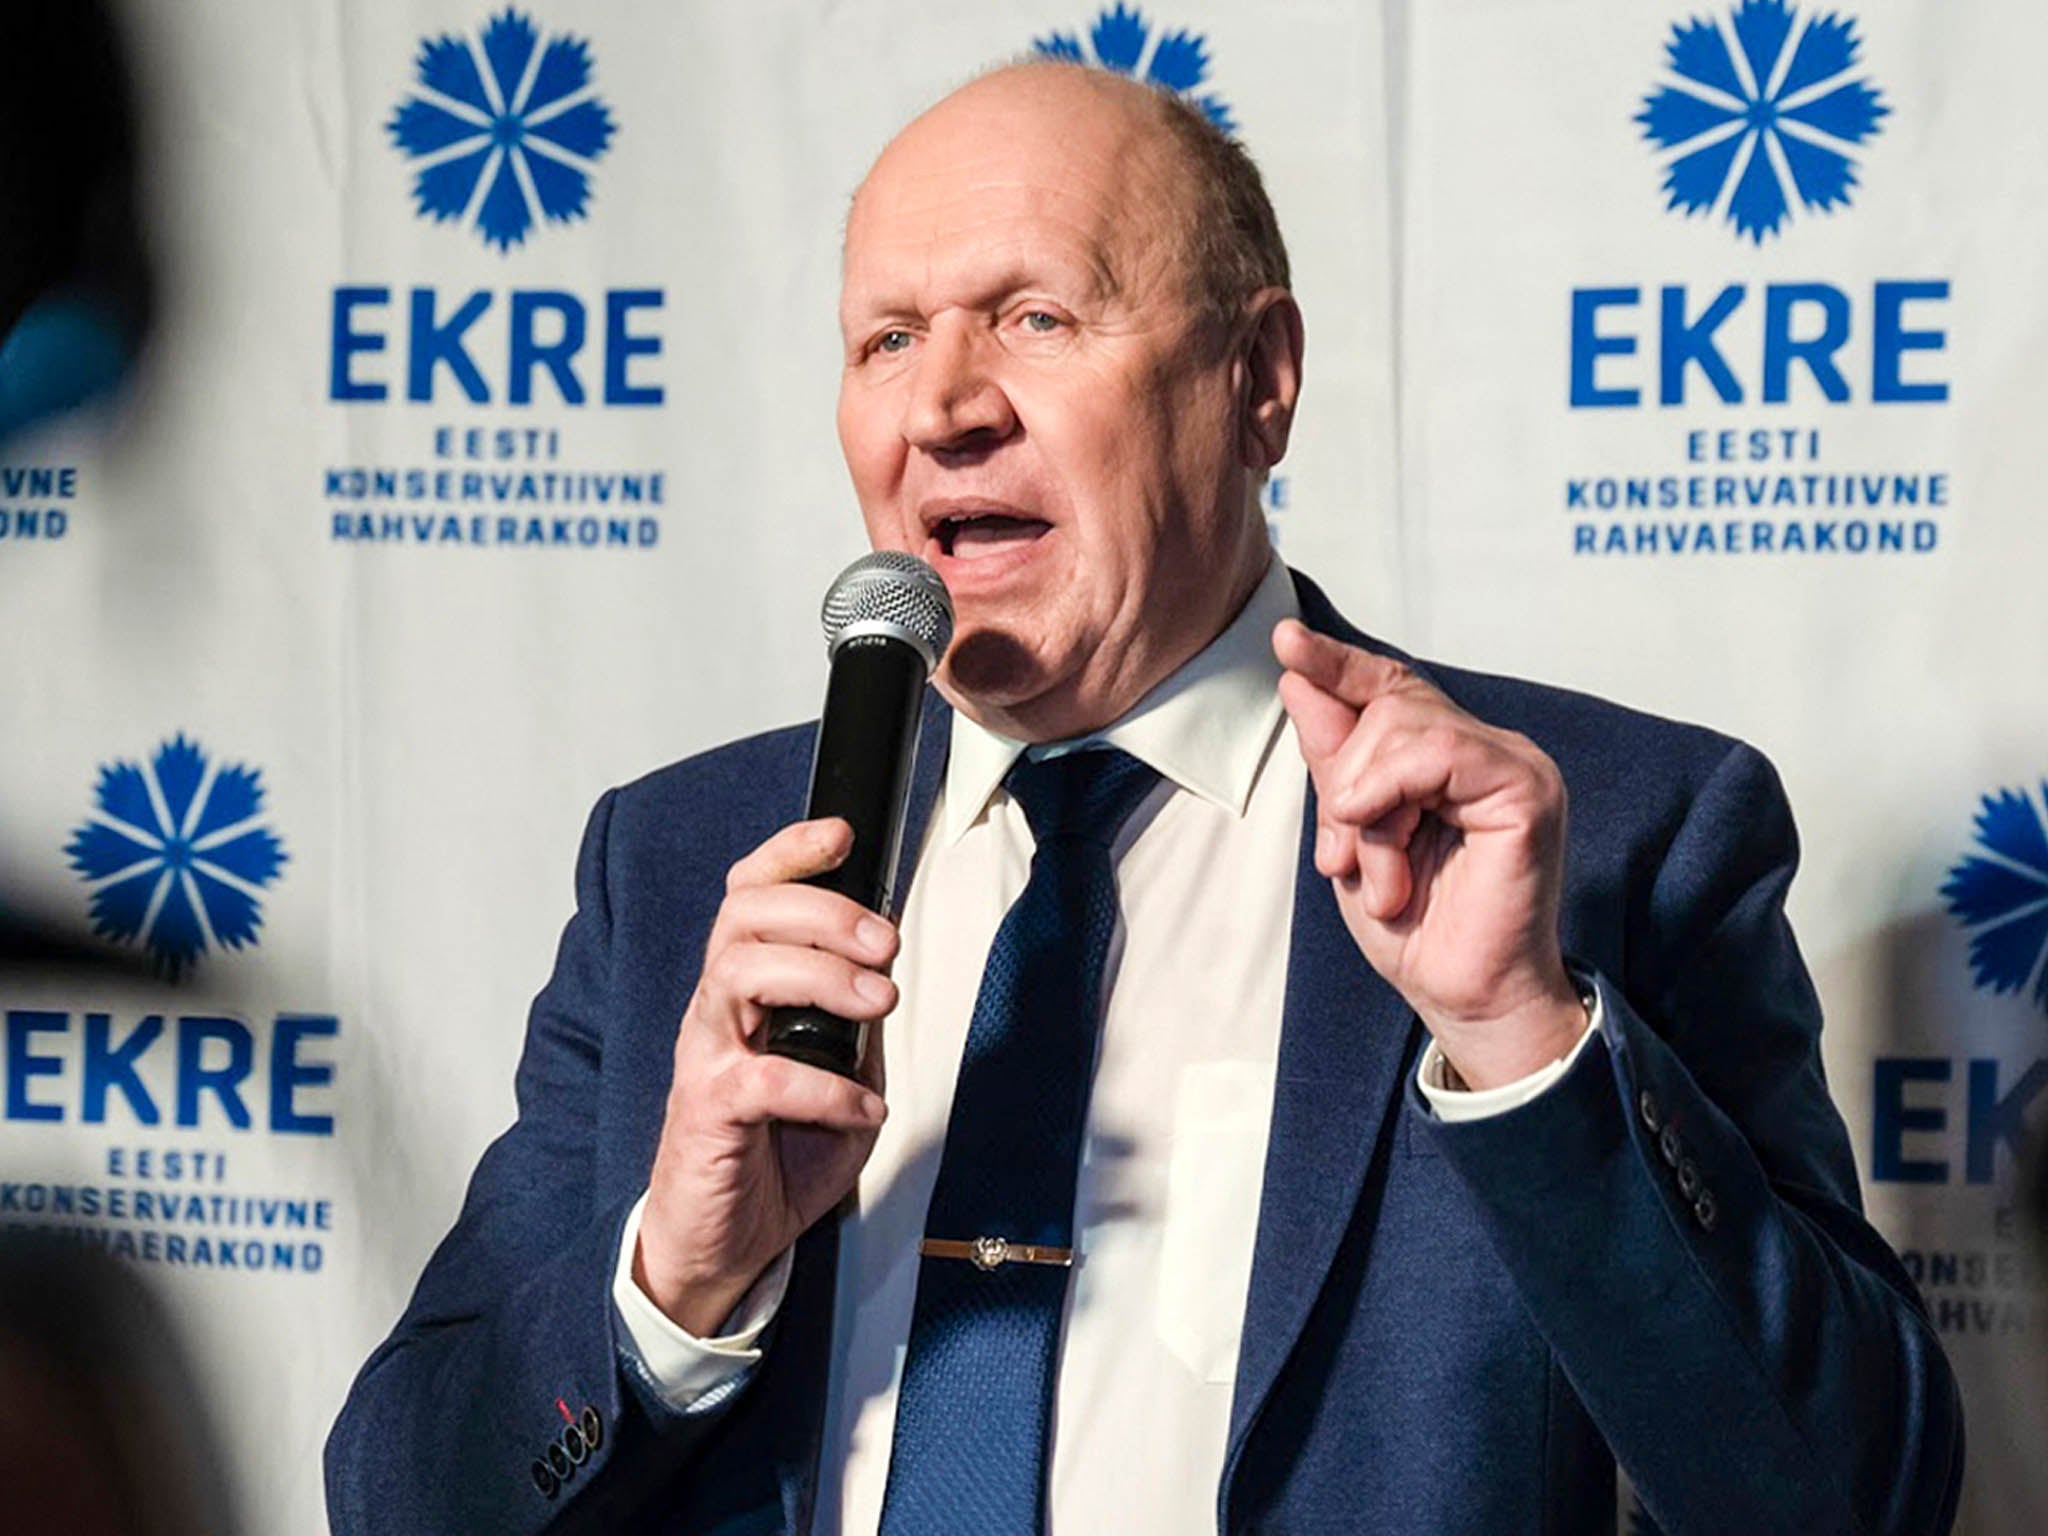 Far-right minister Mart Helme founded the Estonian Consrvative People’s Party in 2019